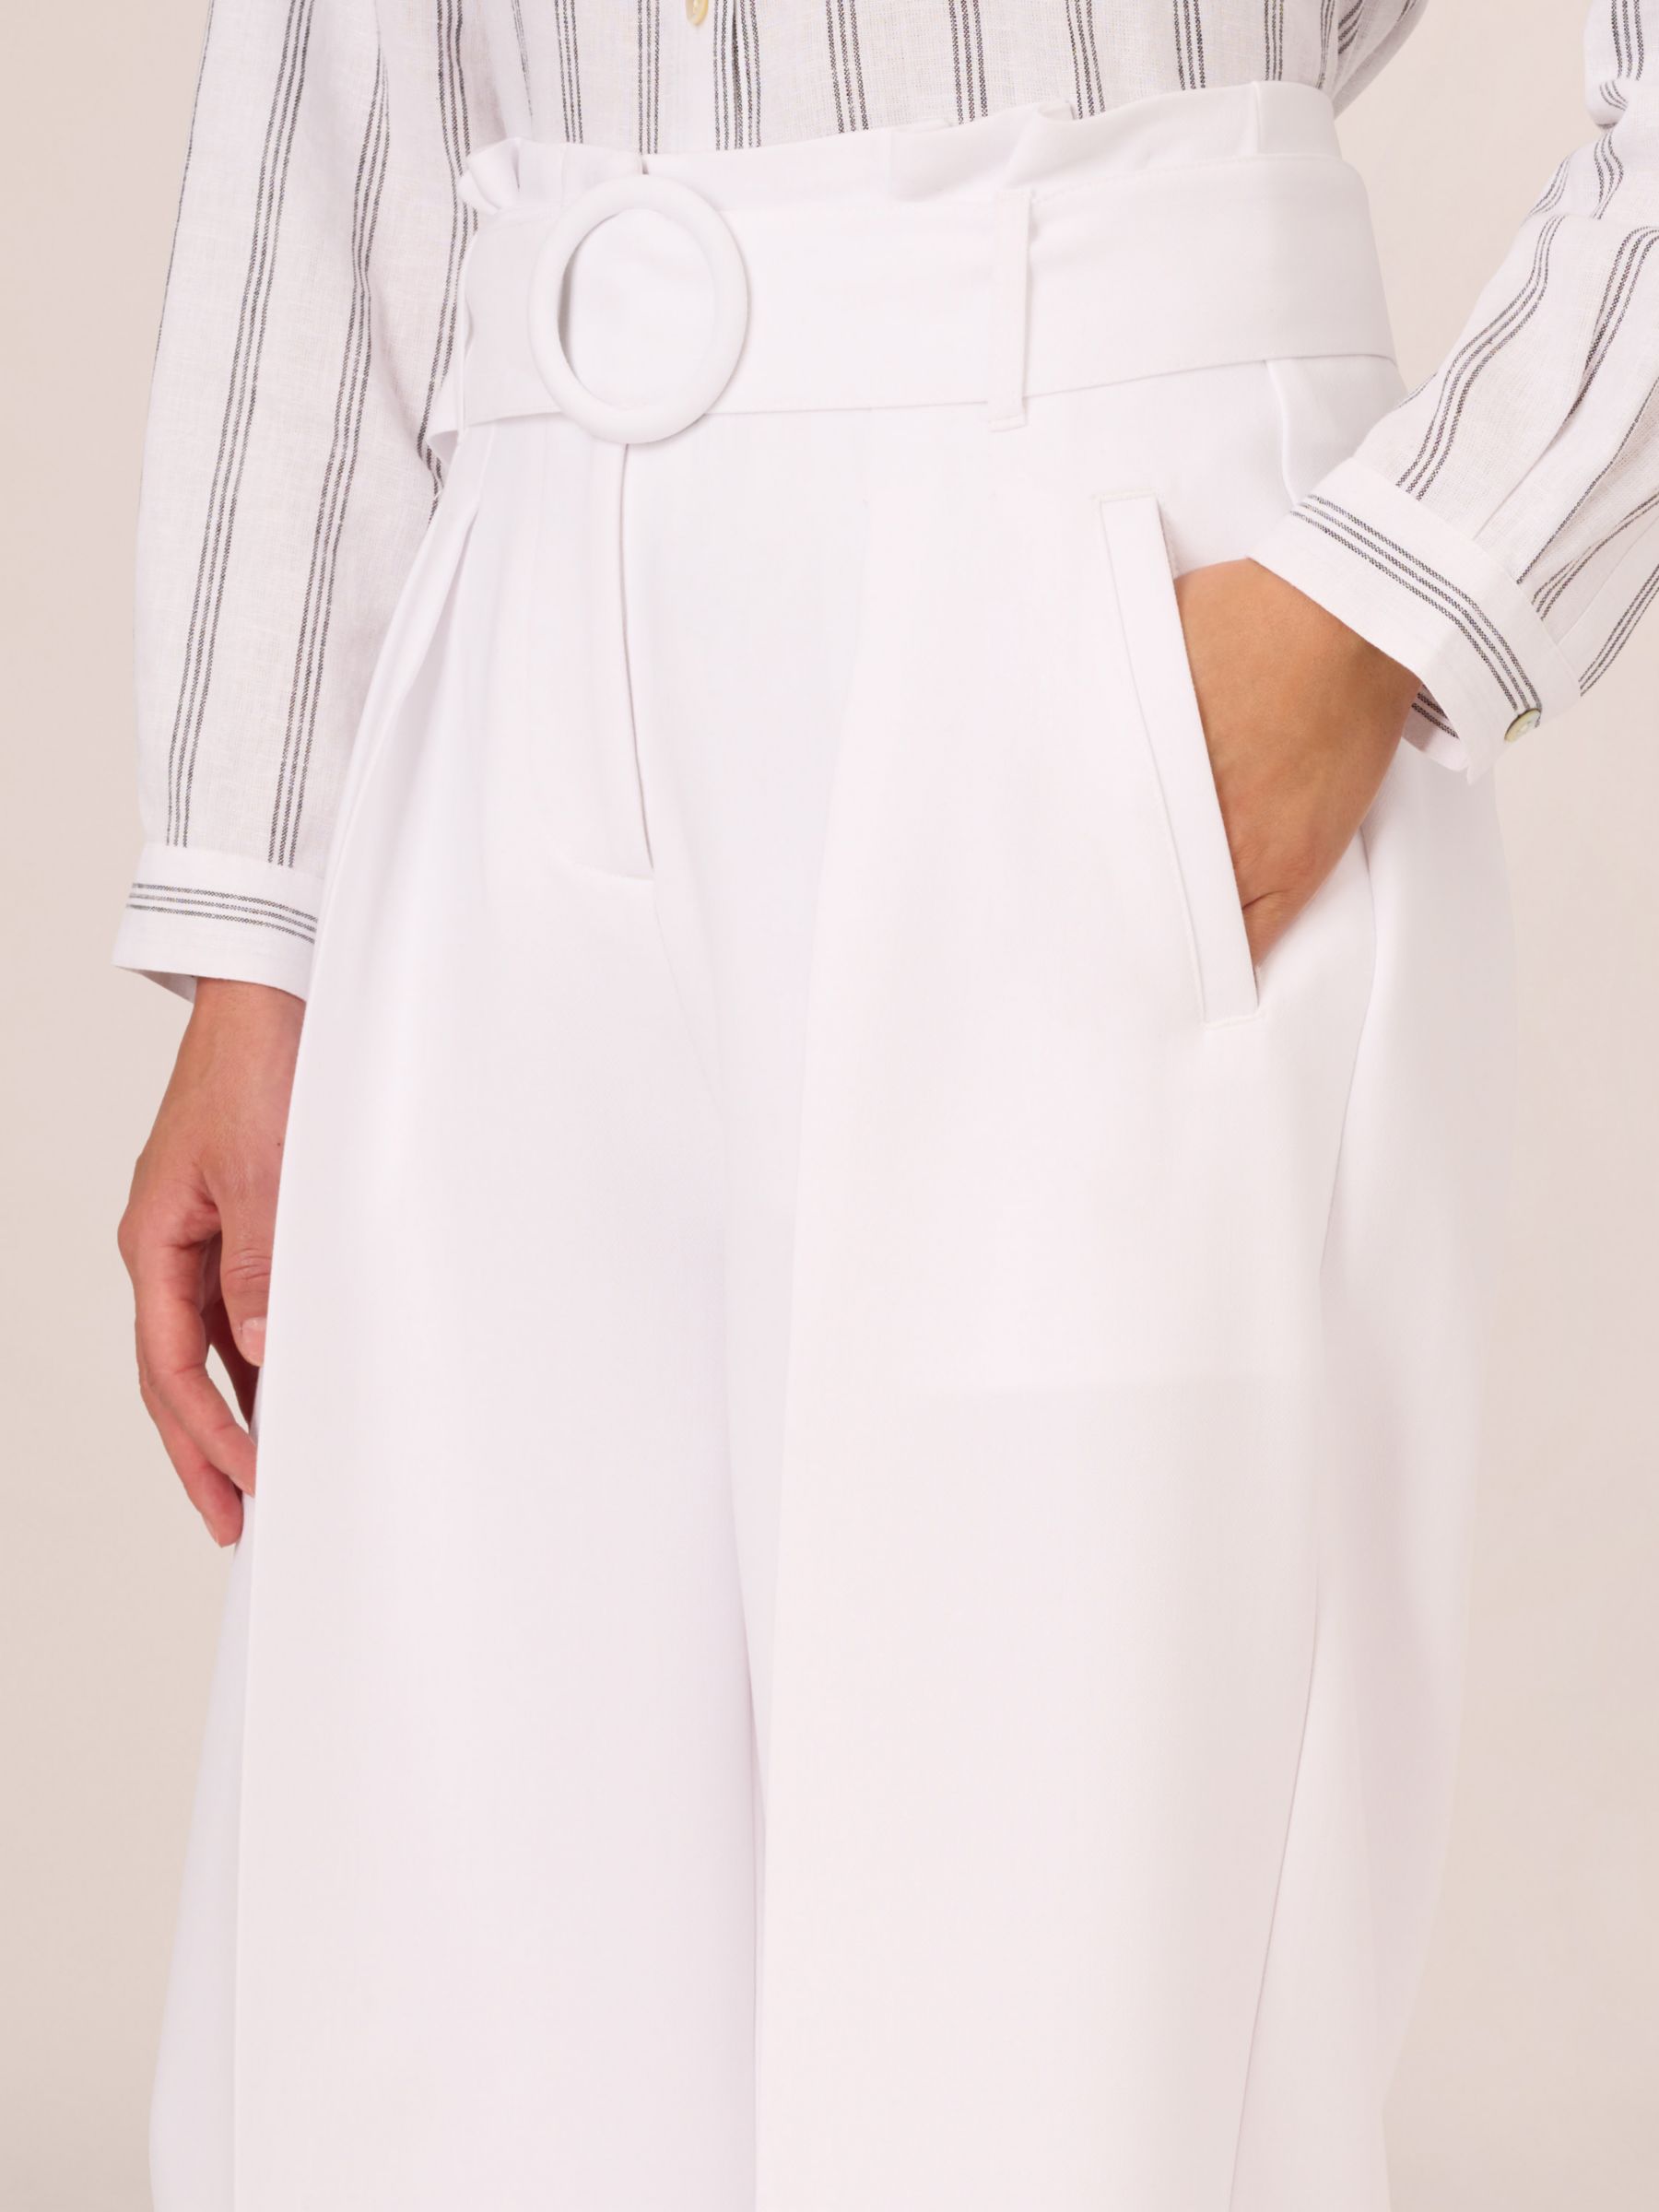 Adrianna Papell Belted Wide Leg Trousers, White, 18